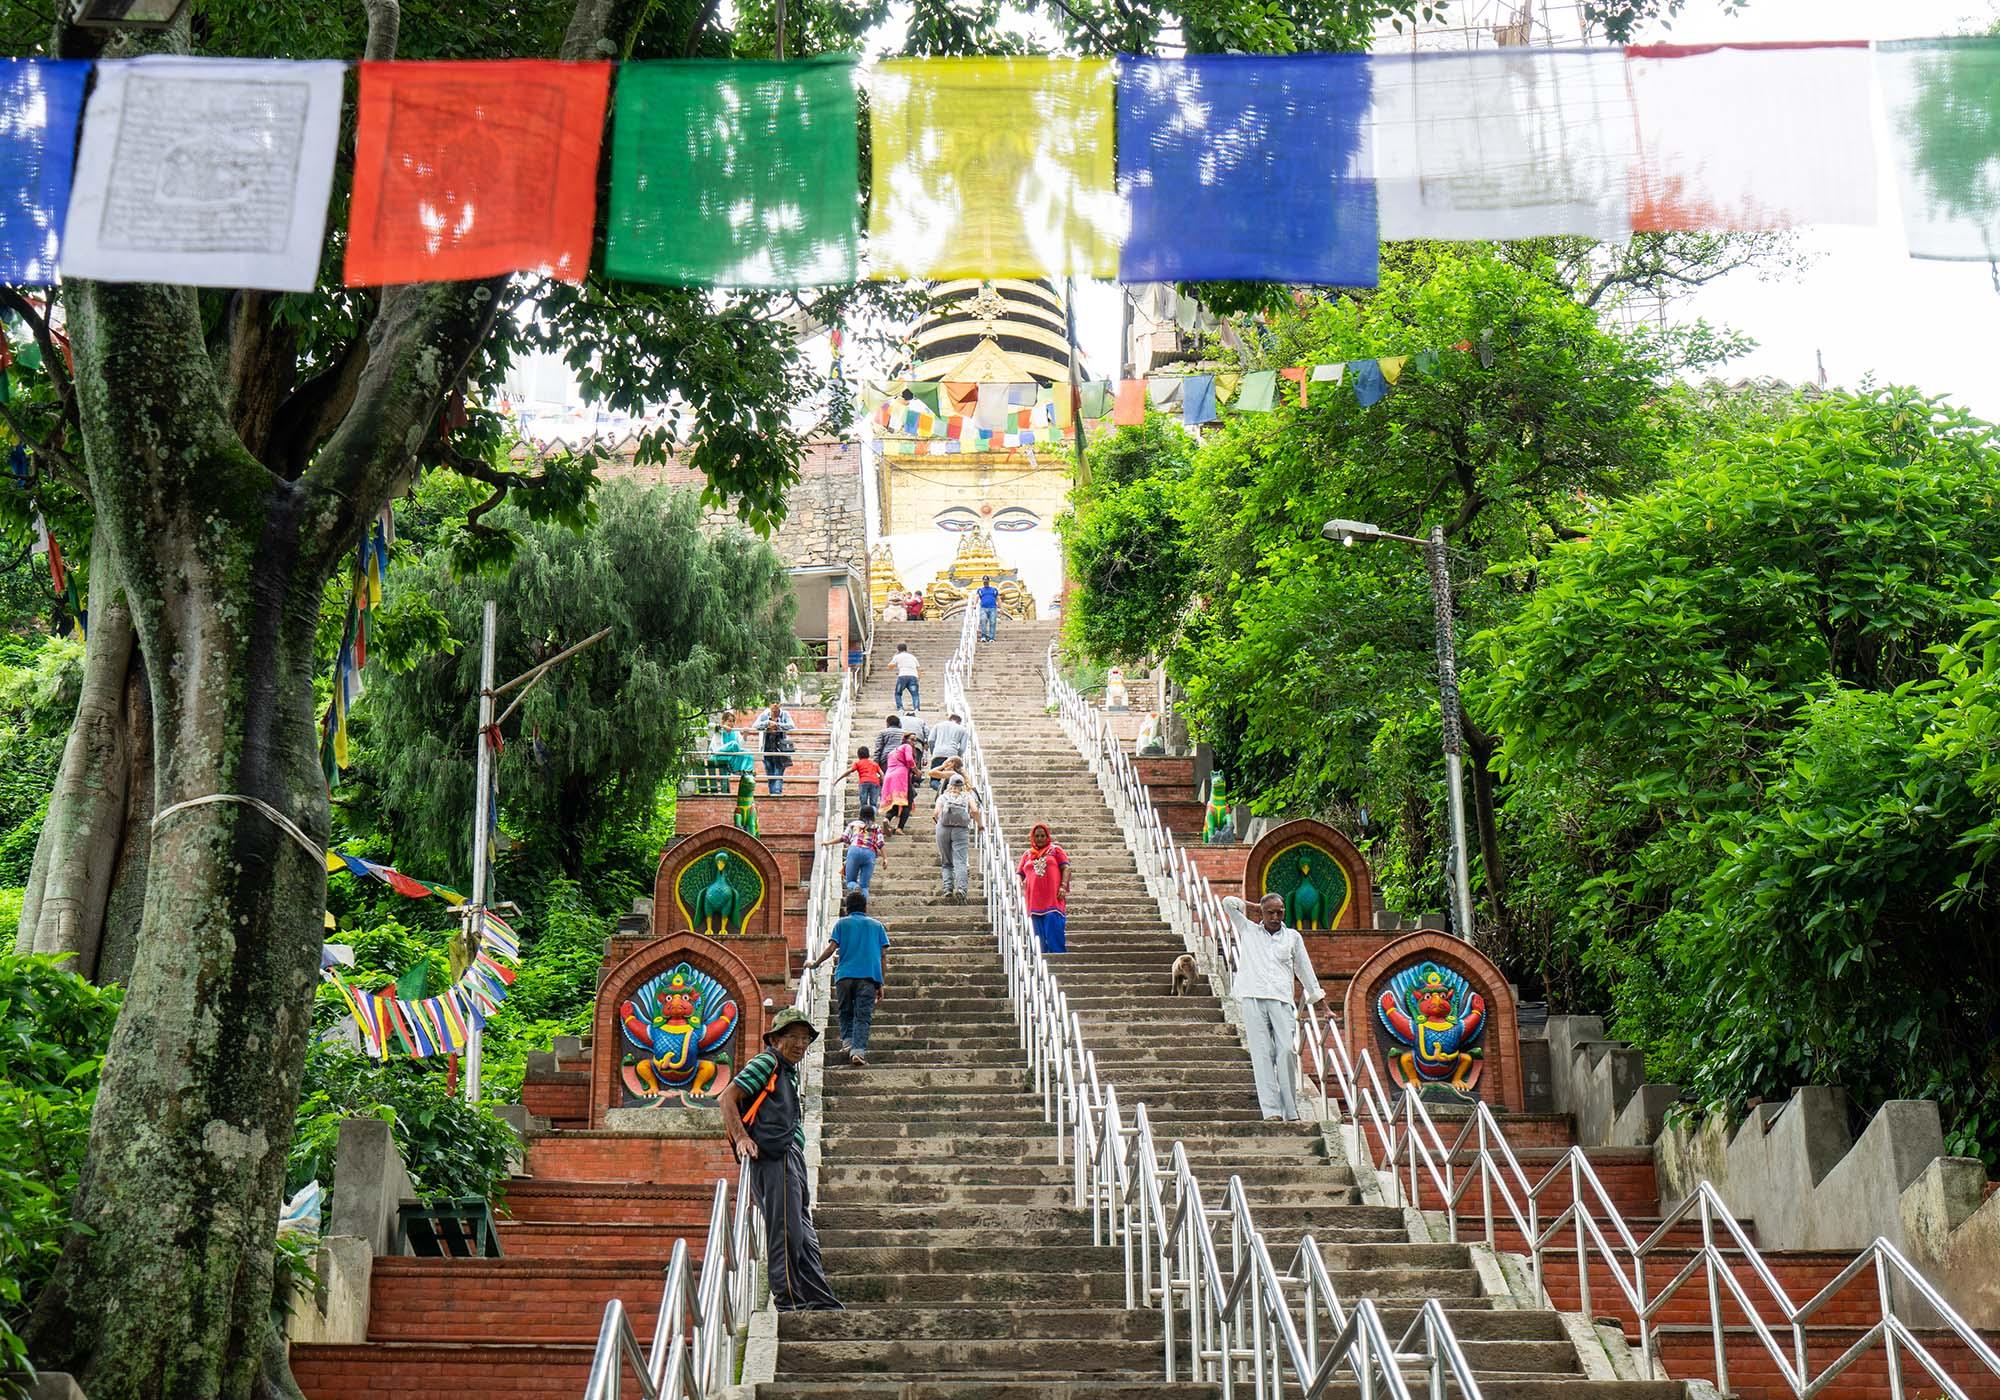 The climb up the 365-step staircase to the top of the hill at Swayambhunath is long but there are places to rest along the way. – © Michael Turtle